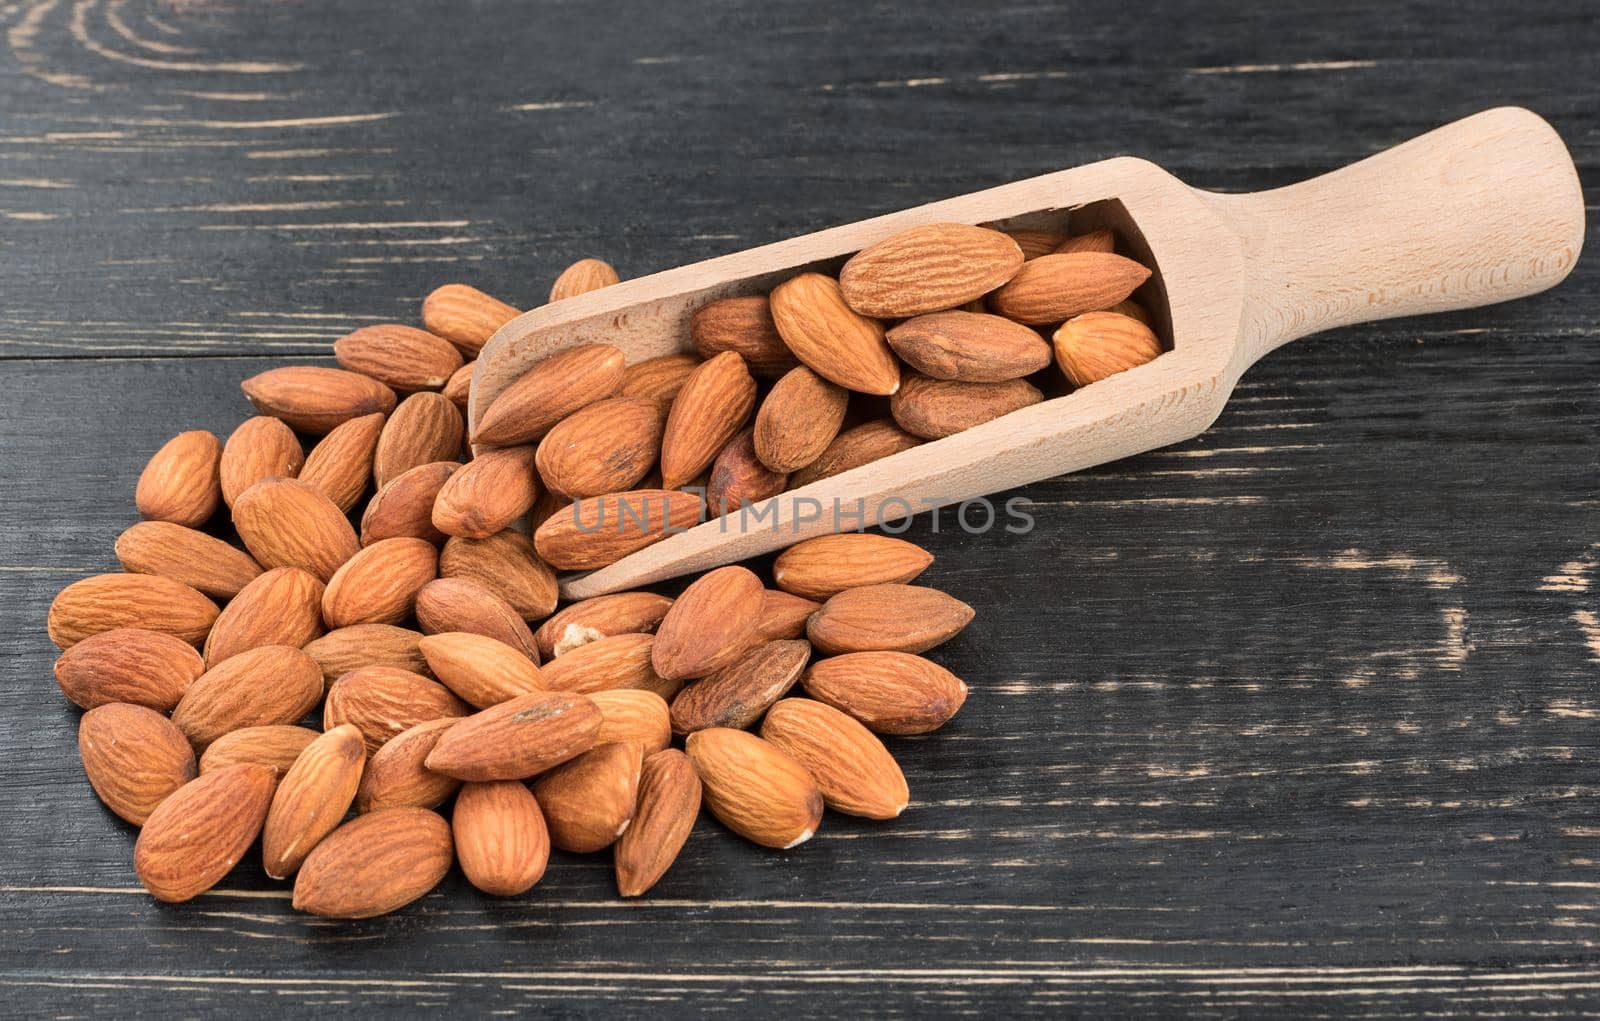 Almonds in a scoop by andregric